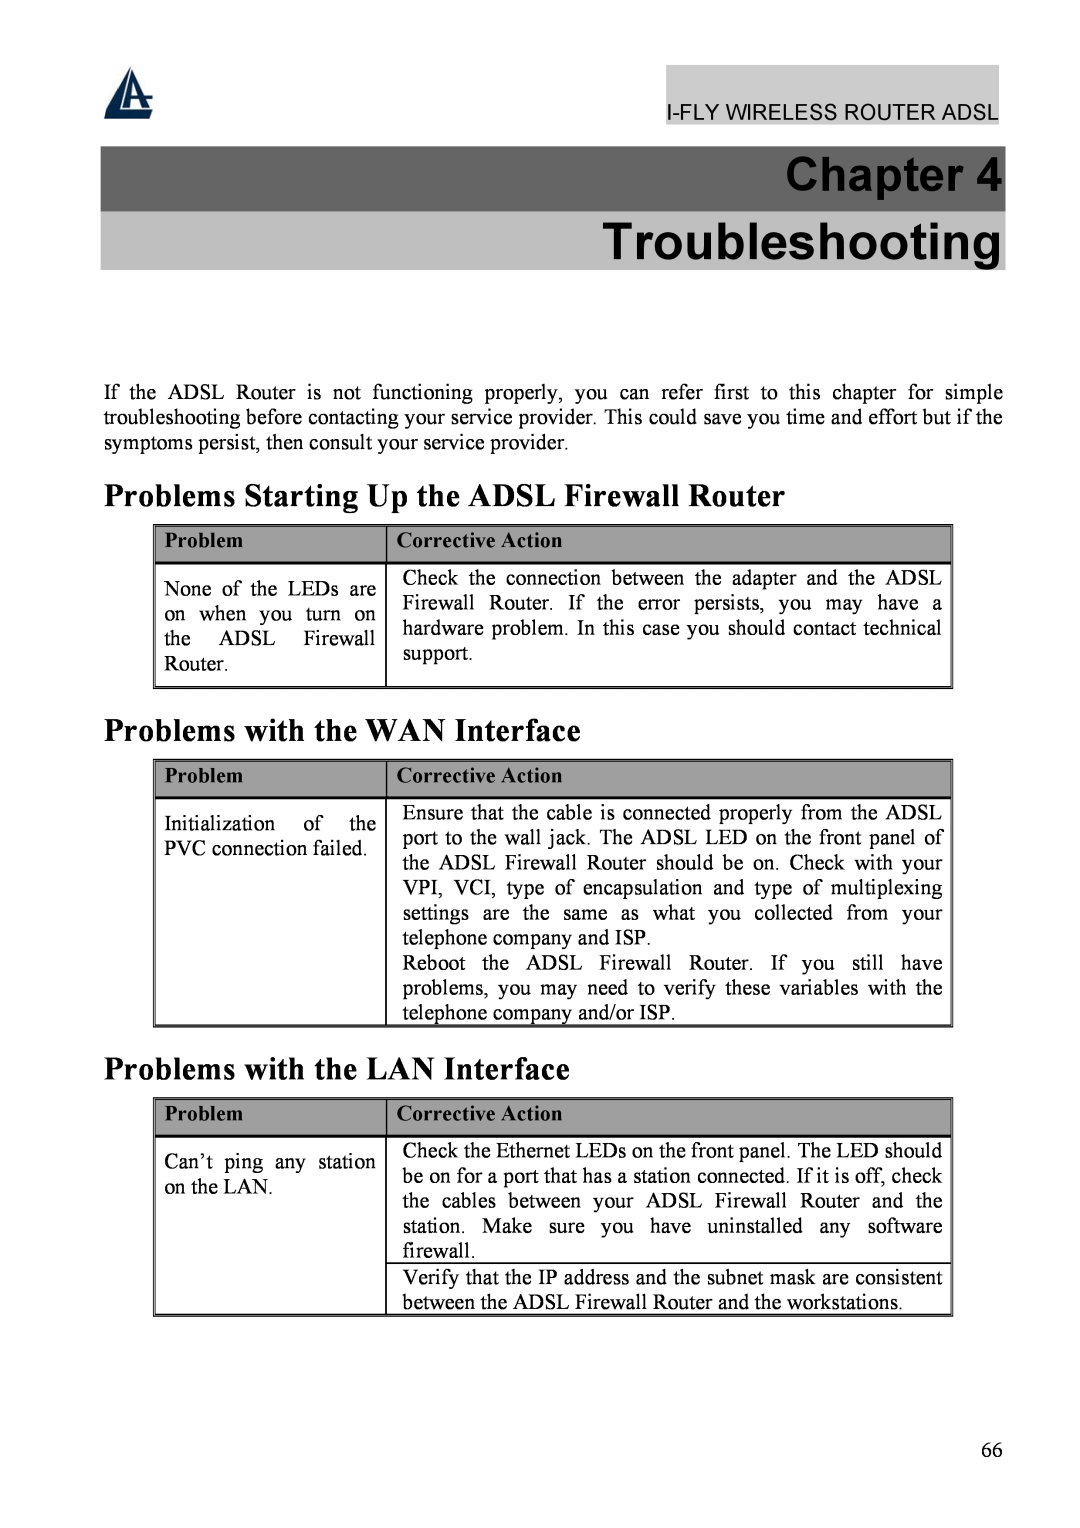 Atlantis Land A02-WRA4-54G Troubleshooting, Problems Starting Up the ADSL Firewall Router, Problems with the WAN Interface 